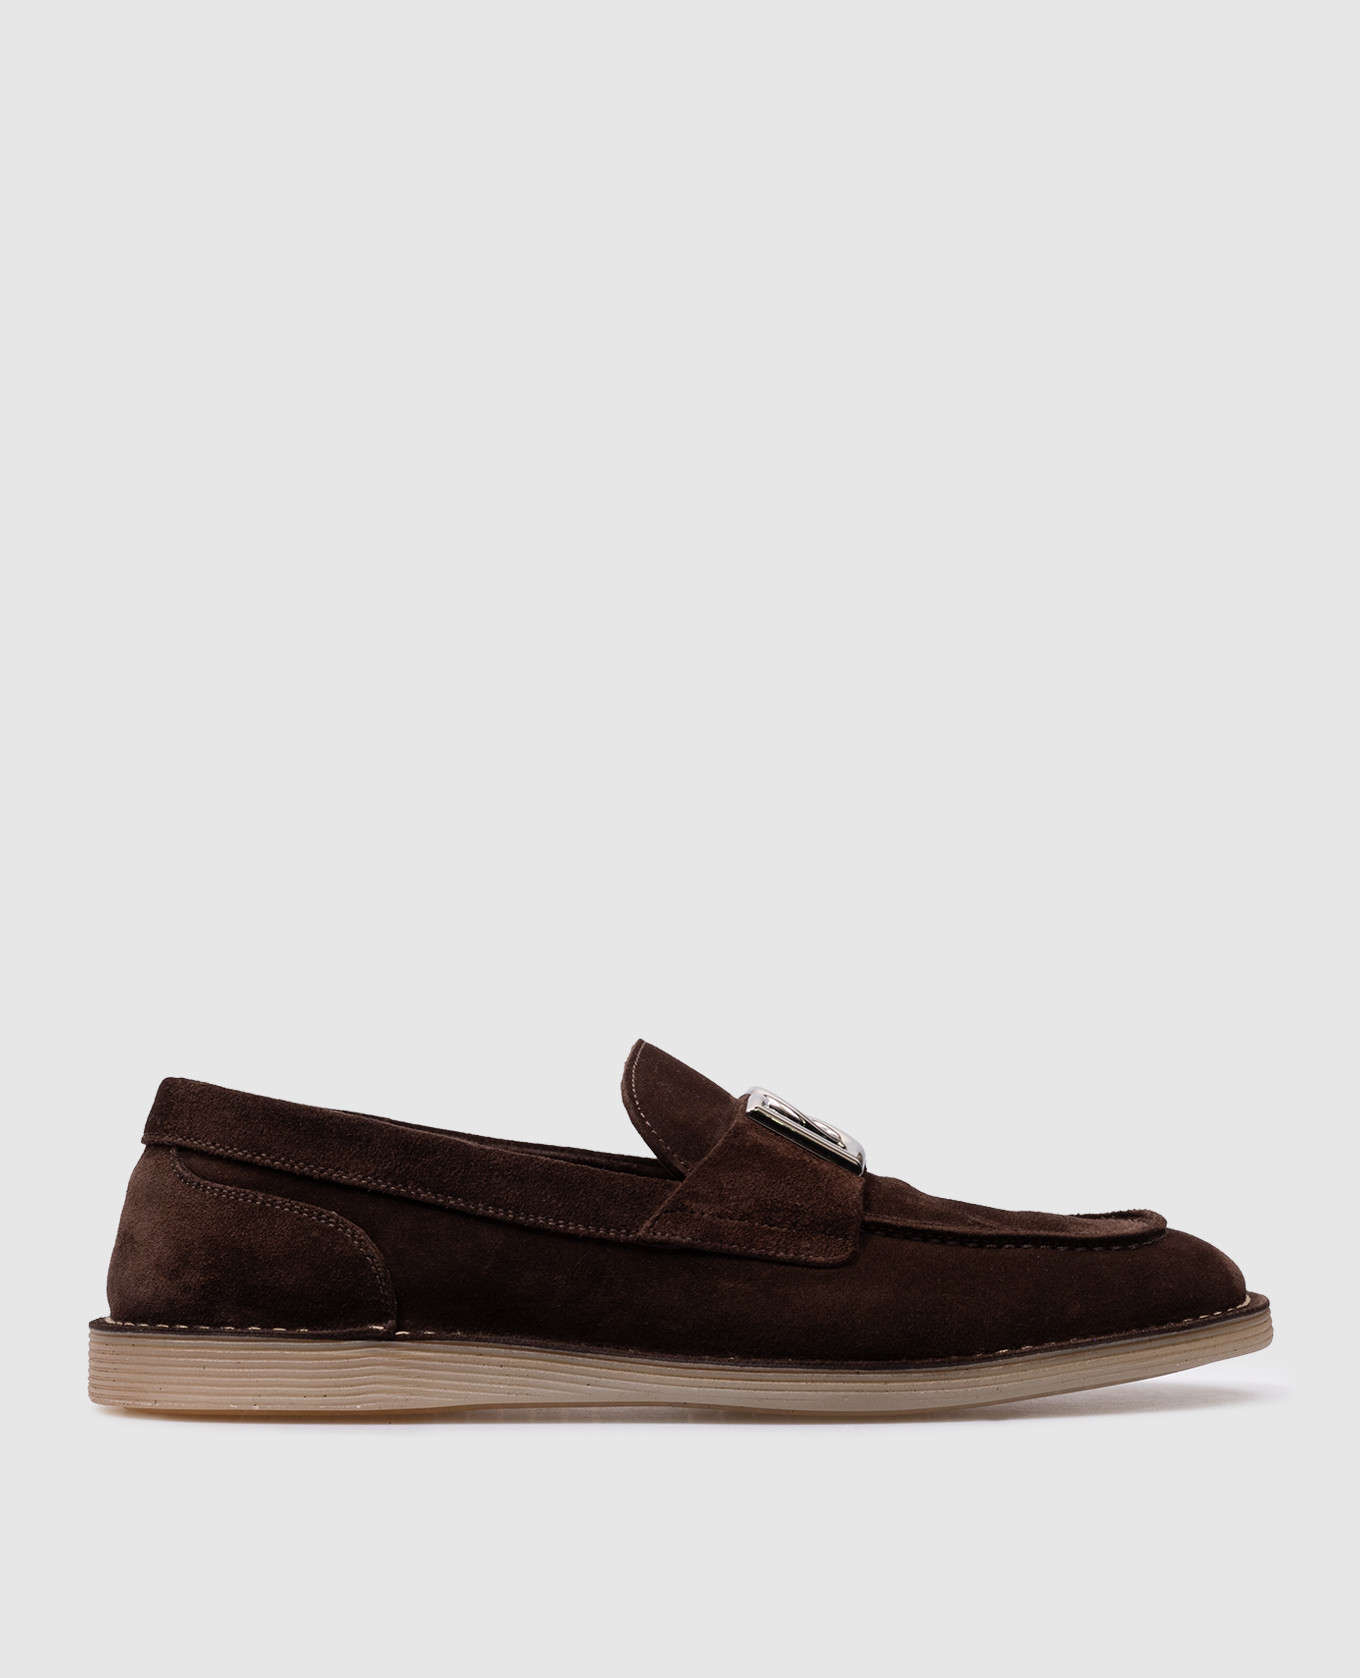 New Florio brown suede loafers with metallic logo